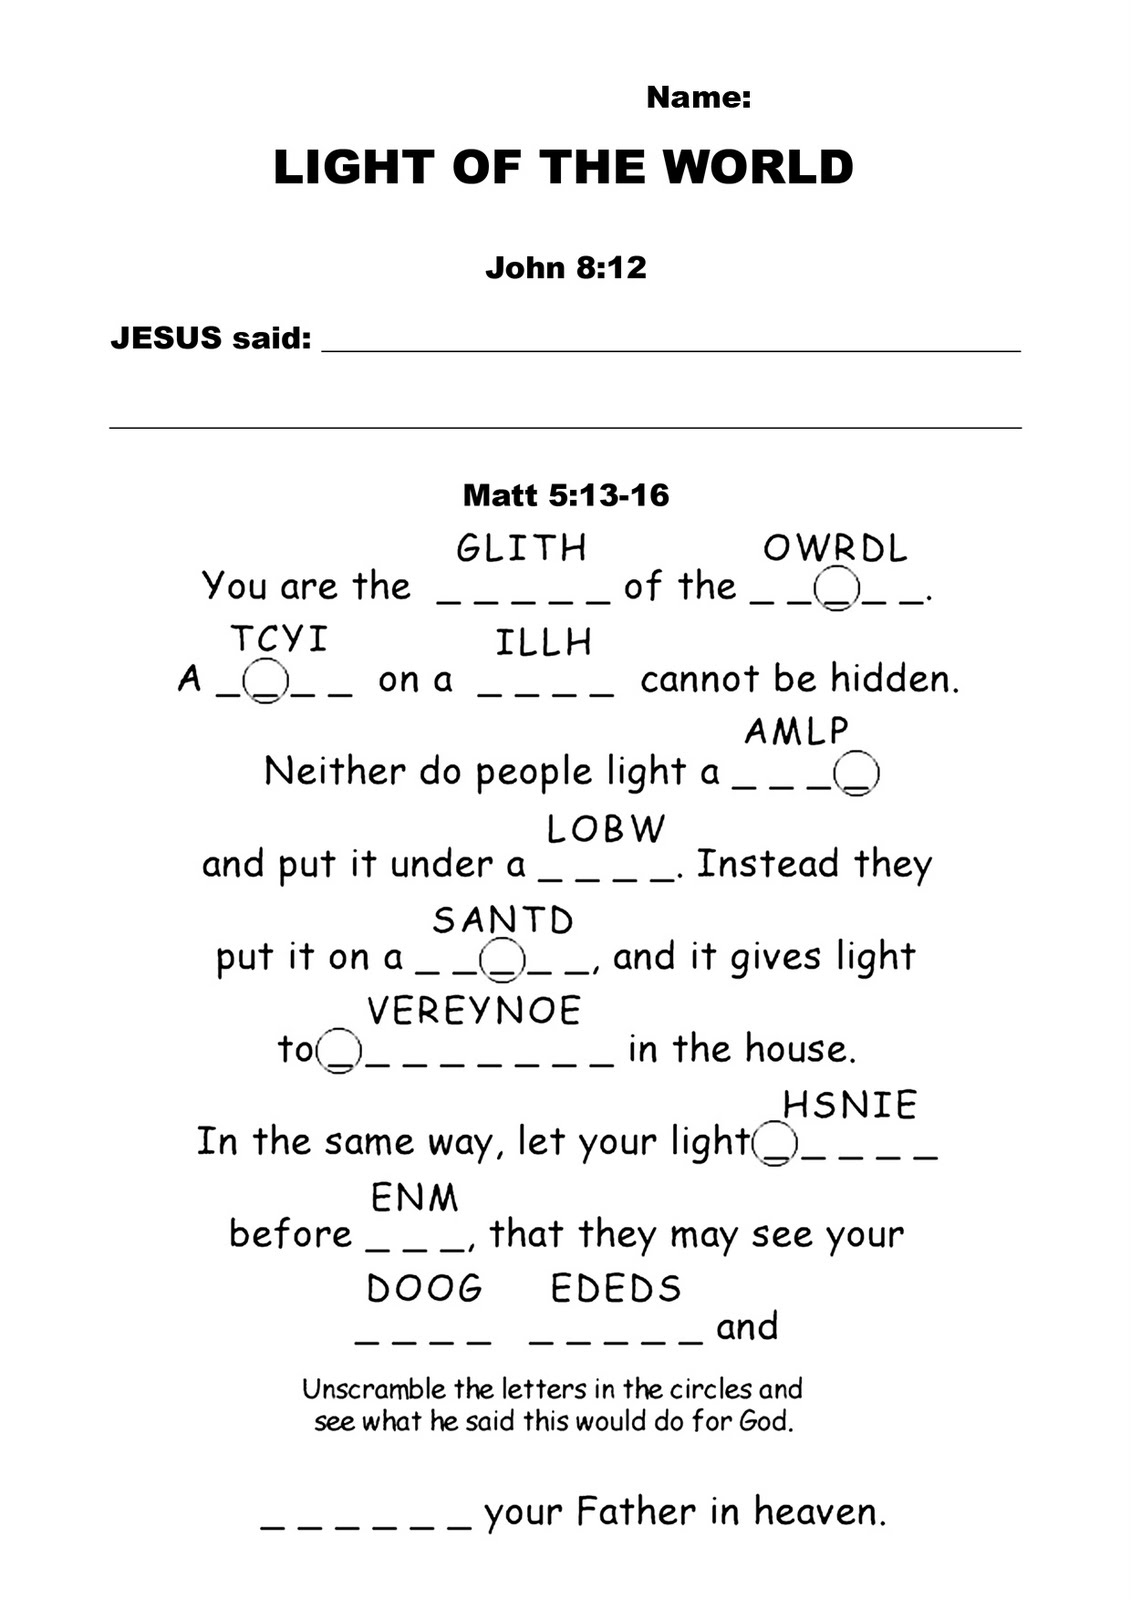 12-best-images-of-bible-activity-worksheets-printable-bible-activity